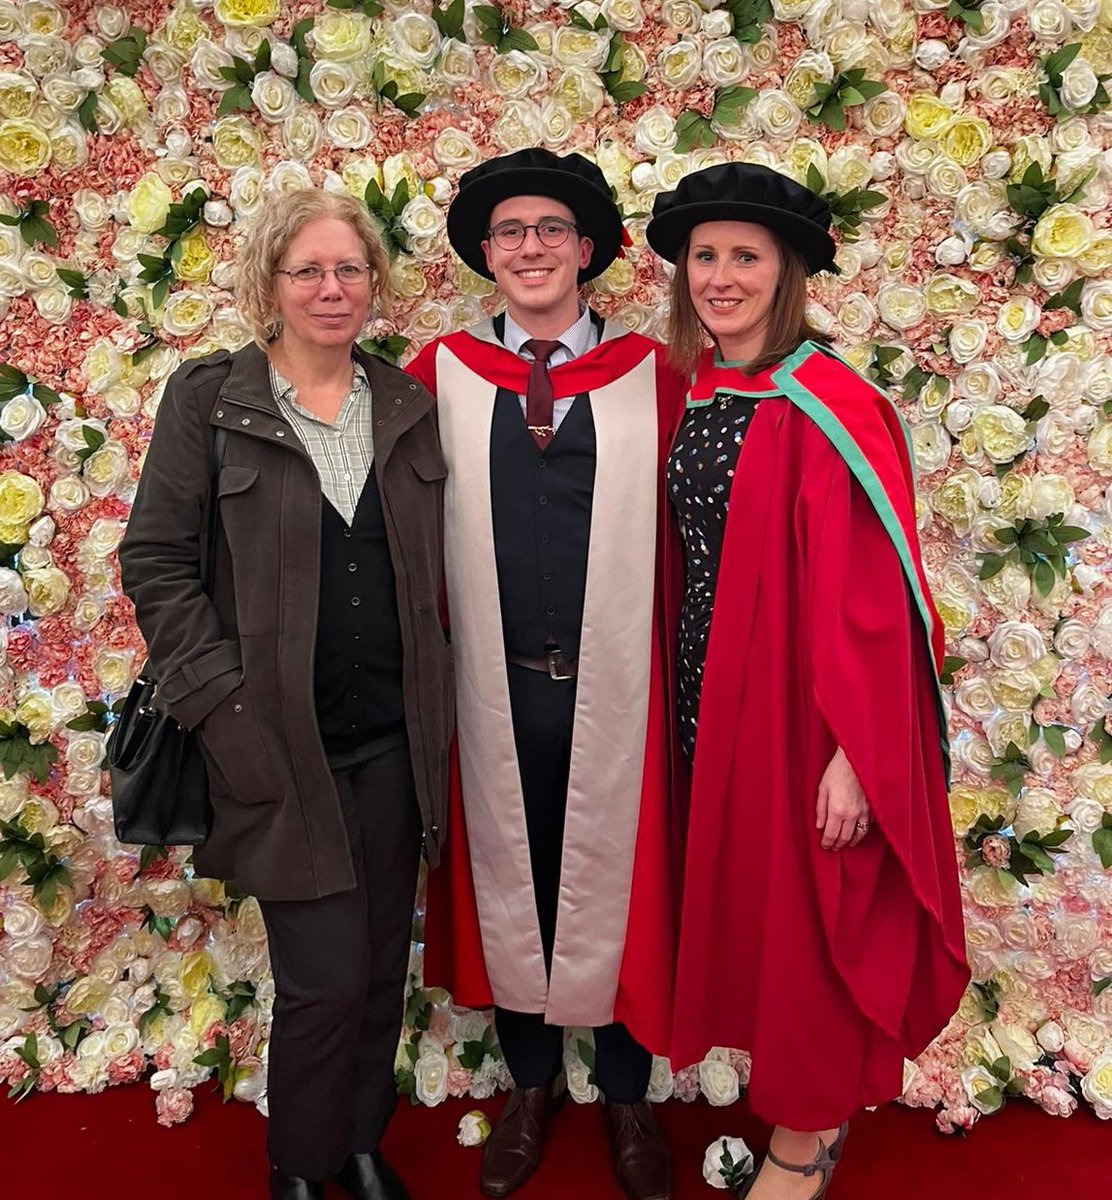 Lovely to see Dr Daniel Maddock @DanielMaddock6 graduate today with VIP guest @dawn2_arnold 😊. Dan's PhD was undertaken just as Covid hit and we are enormously proud of him for finishing in time and with several papers published 🎉 #uwegraduate